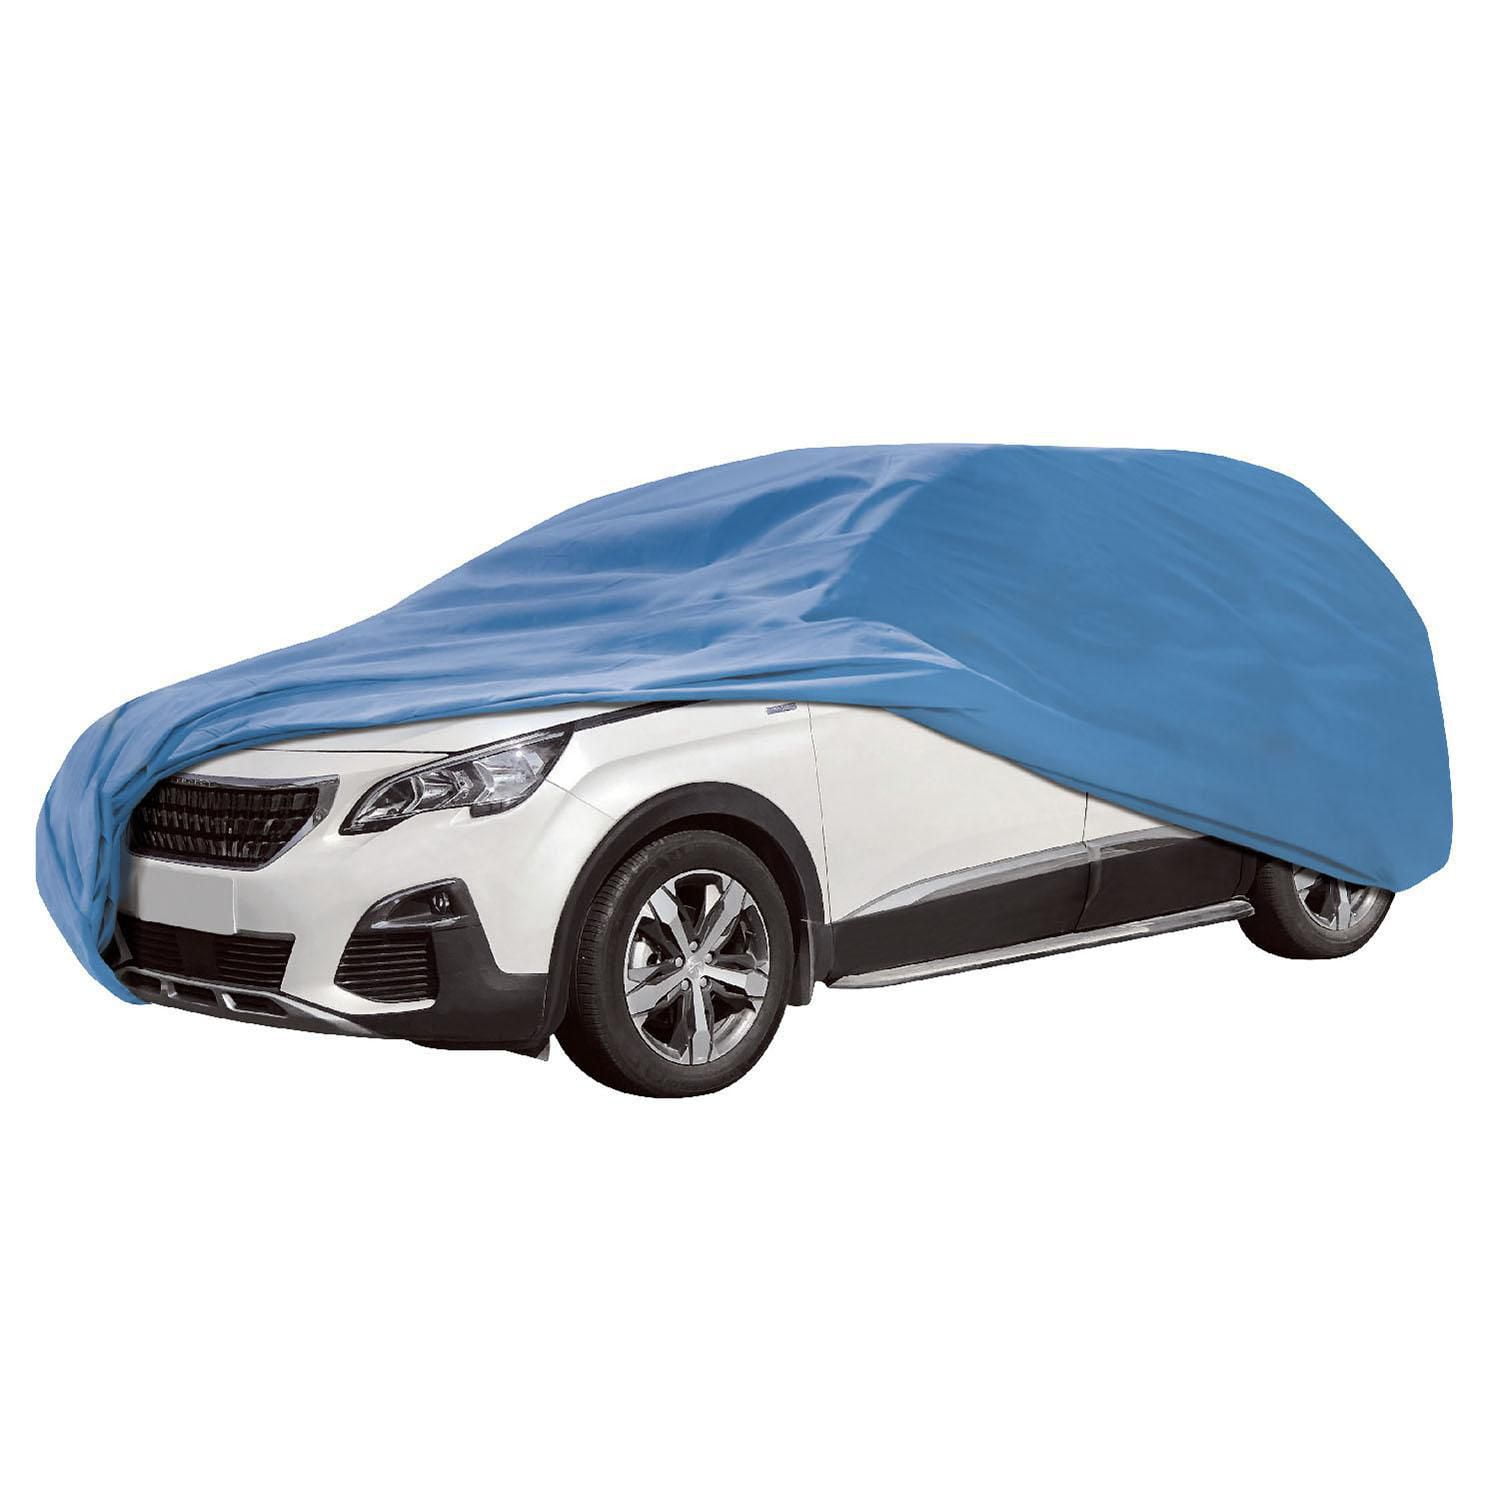 Custom indoor car cover fits Peugeot 3008 Le Mans Blue now € 209 Limited  stock, OEM quality car cover, Original fit cover